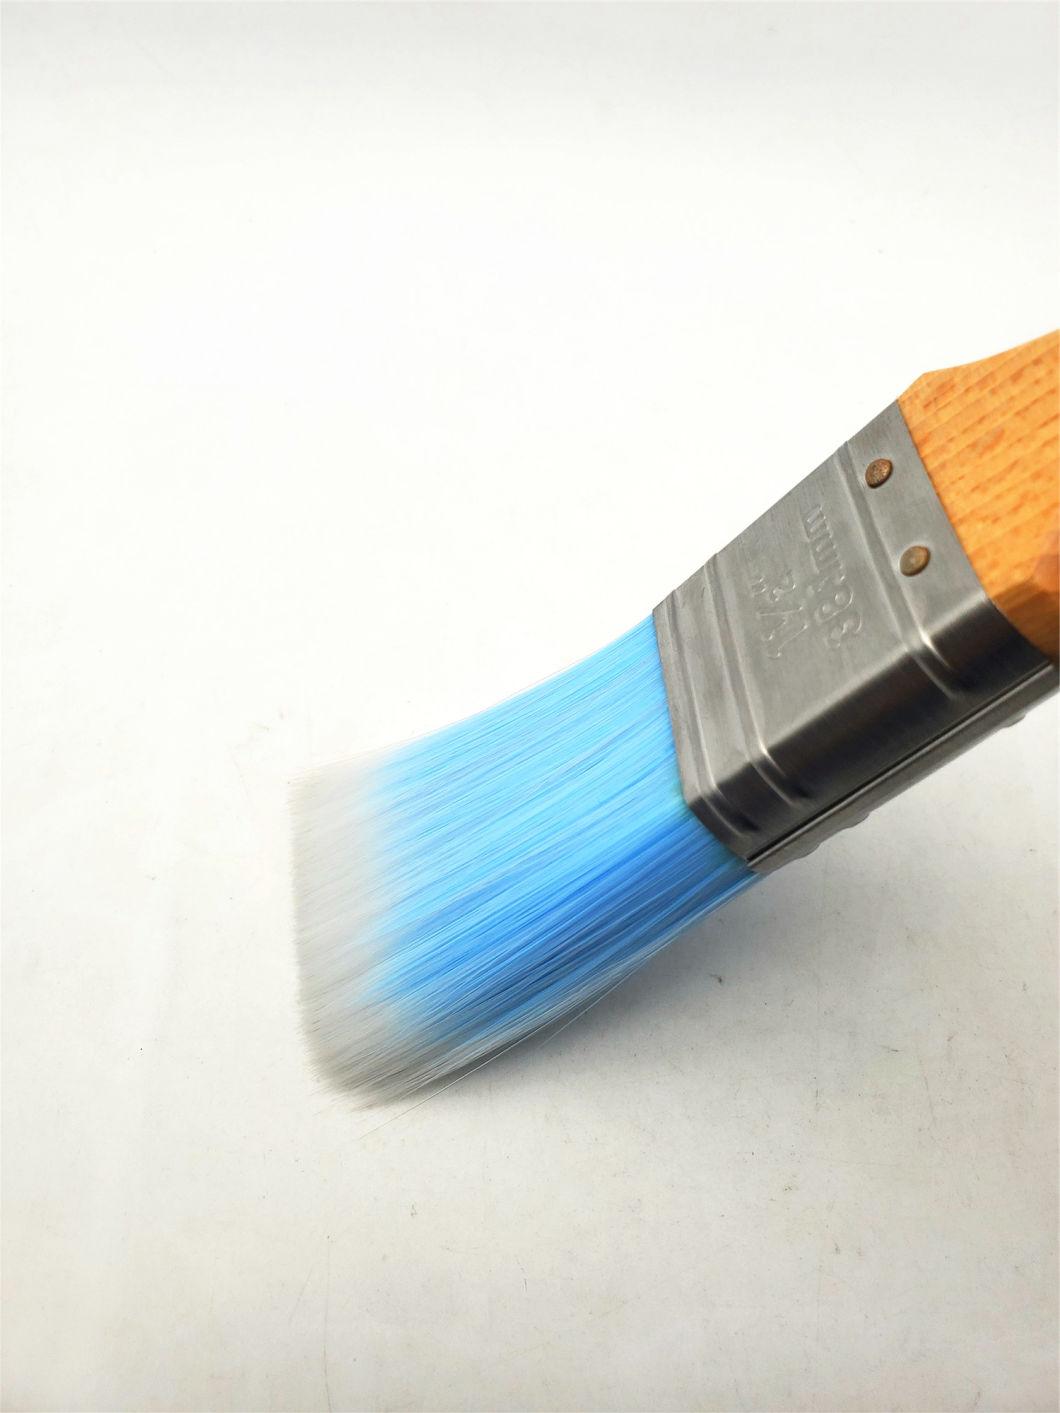 High Quality Art Paint Brush with Wooden Handle